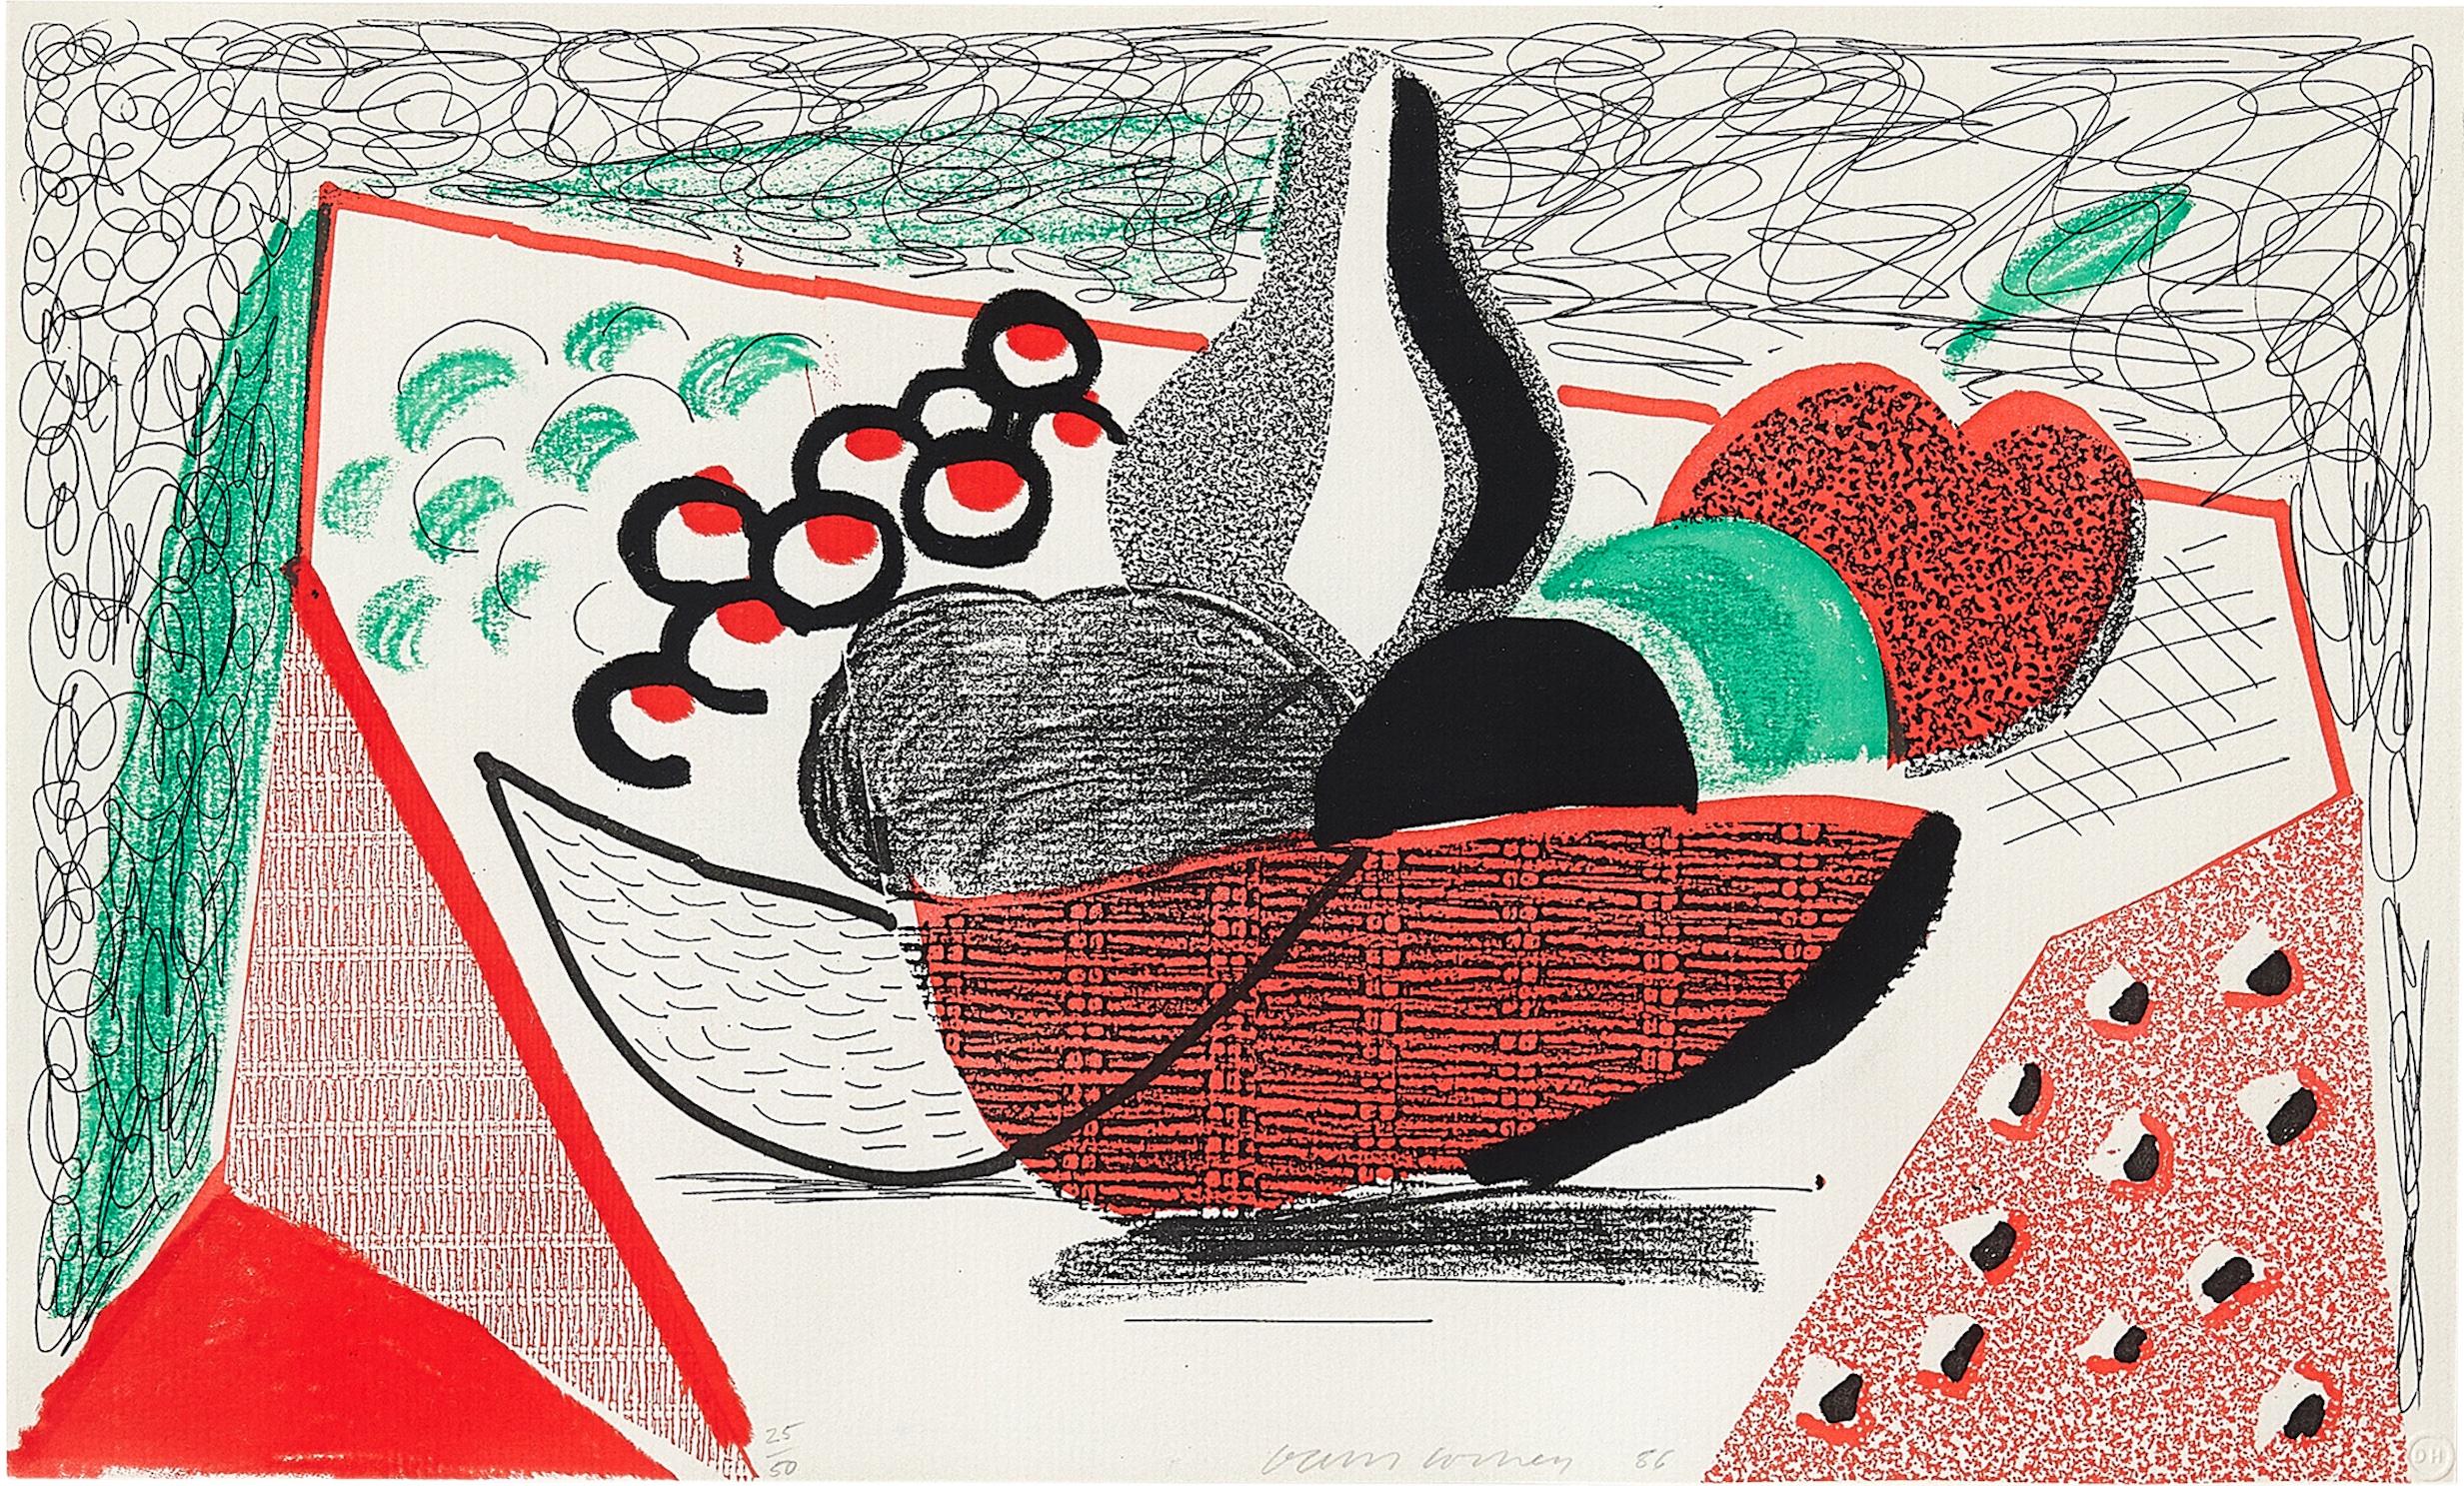 Apples, Pears & Grapes, May 1986
David Hockney

Homemade print in colours executed on an office colour copy machine on Arches rag paper
Signed, dated and numbered  25 from the edition of 50
There is a “DH” blindstamp.
Within the artist's designated